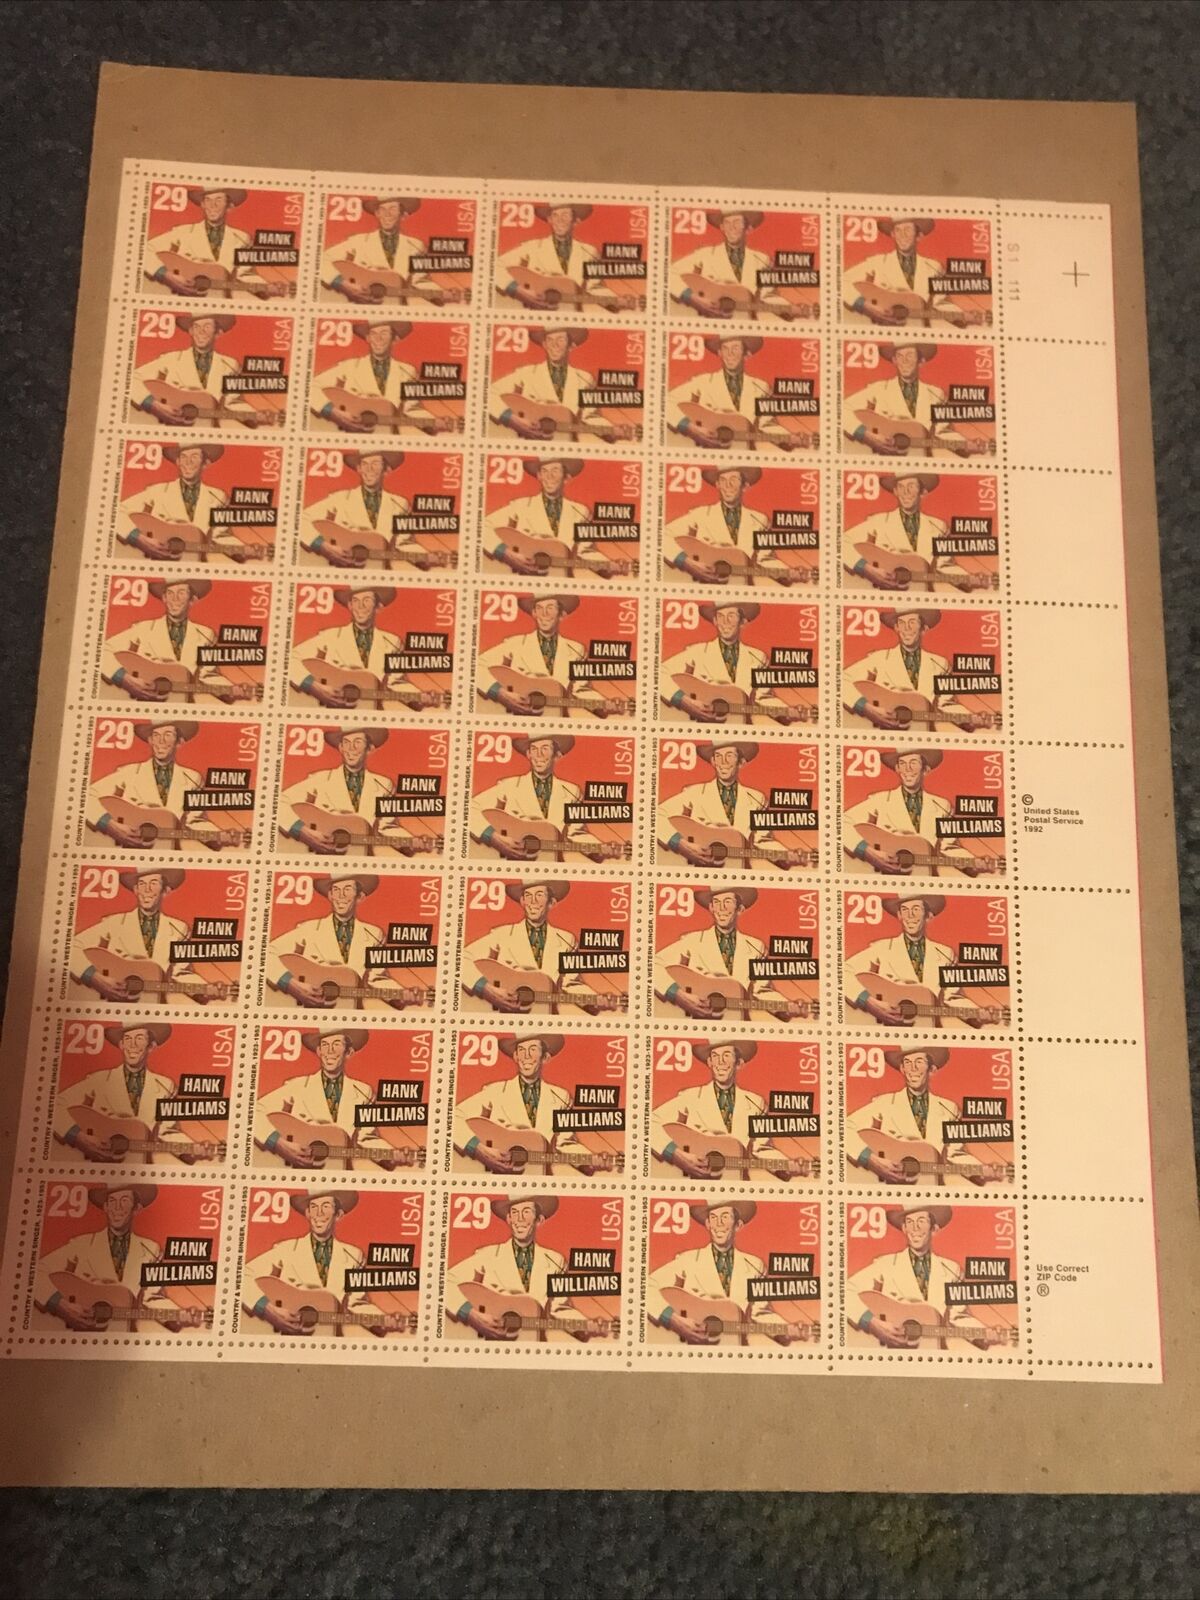 Hank Williams Full Stamp Sheet Mint Condition #2723 Never Hinged Rare!